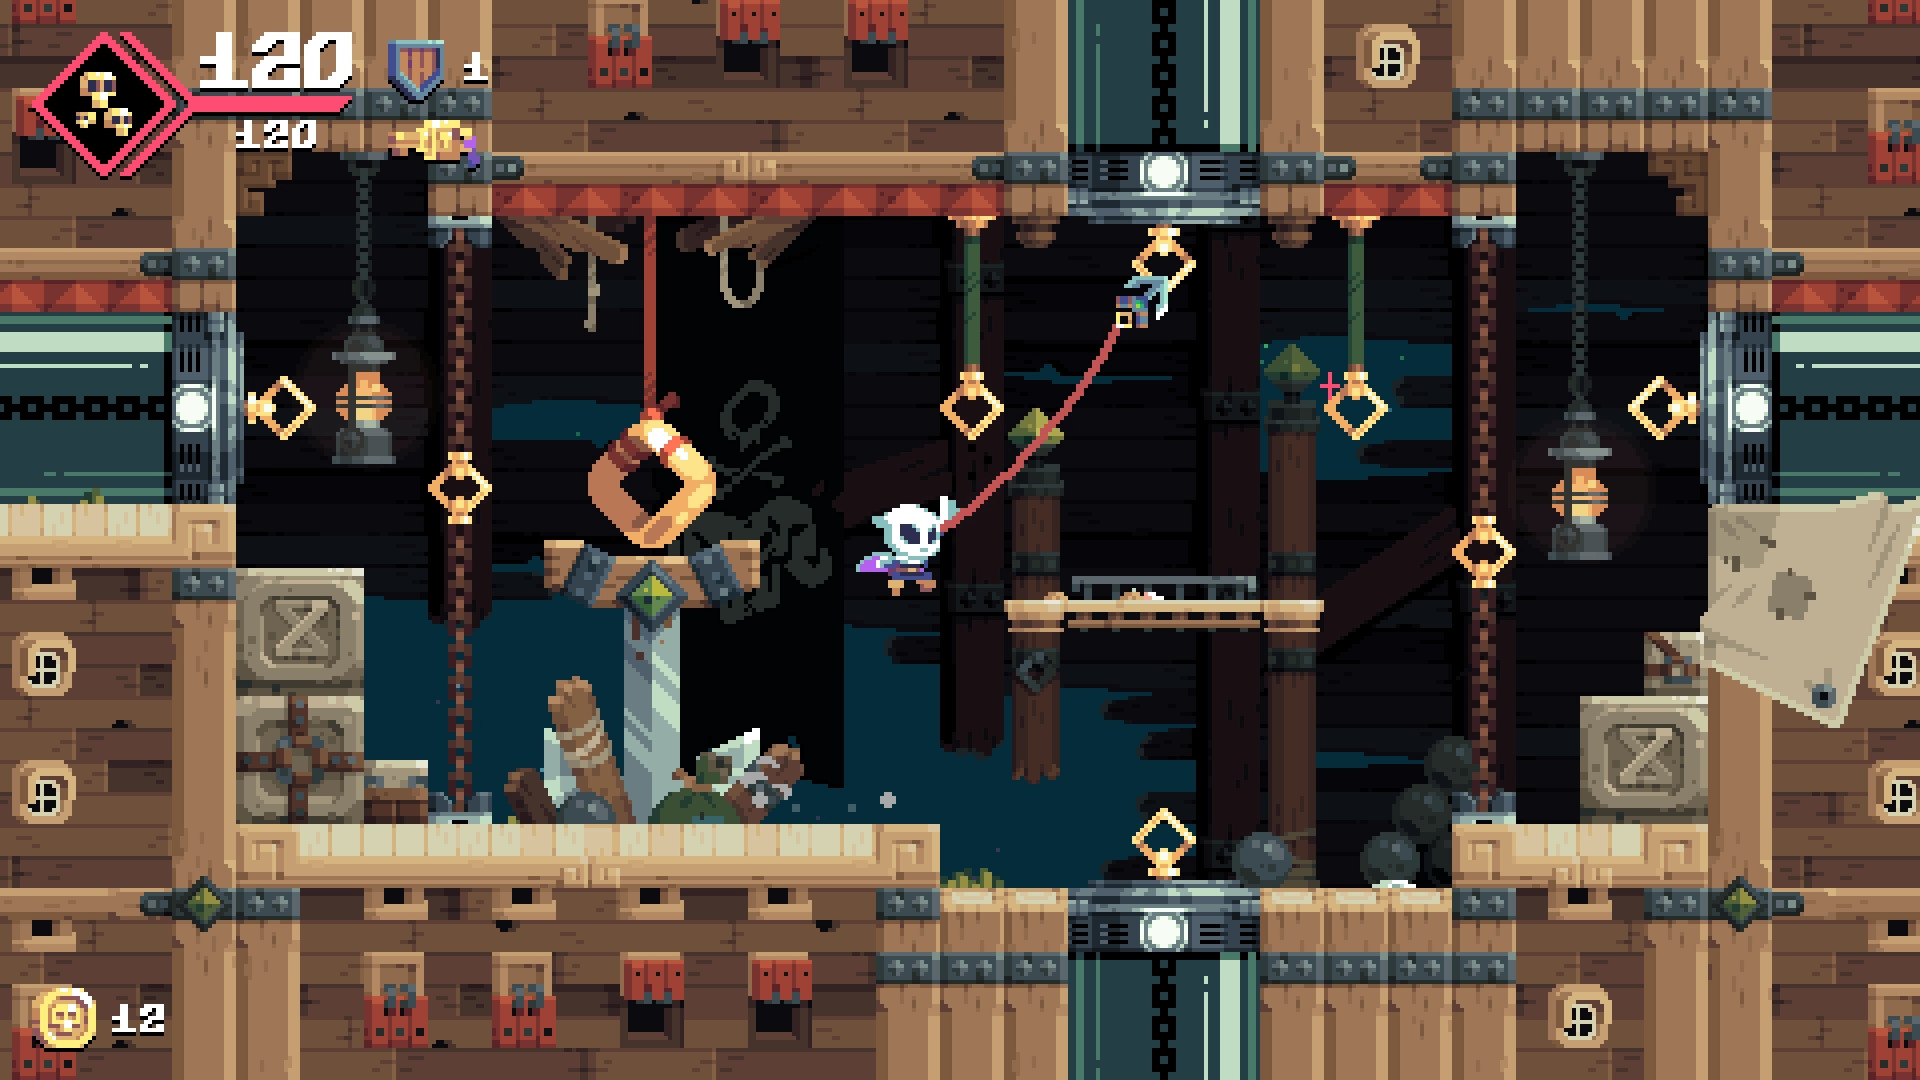 Game: Flinthook Review